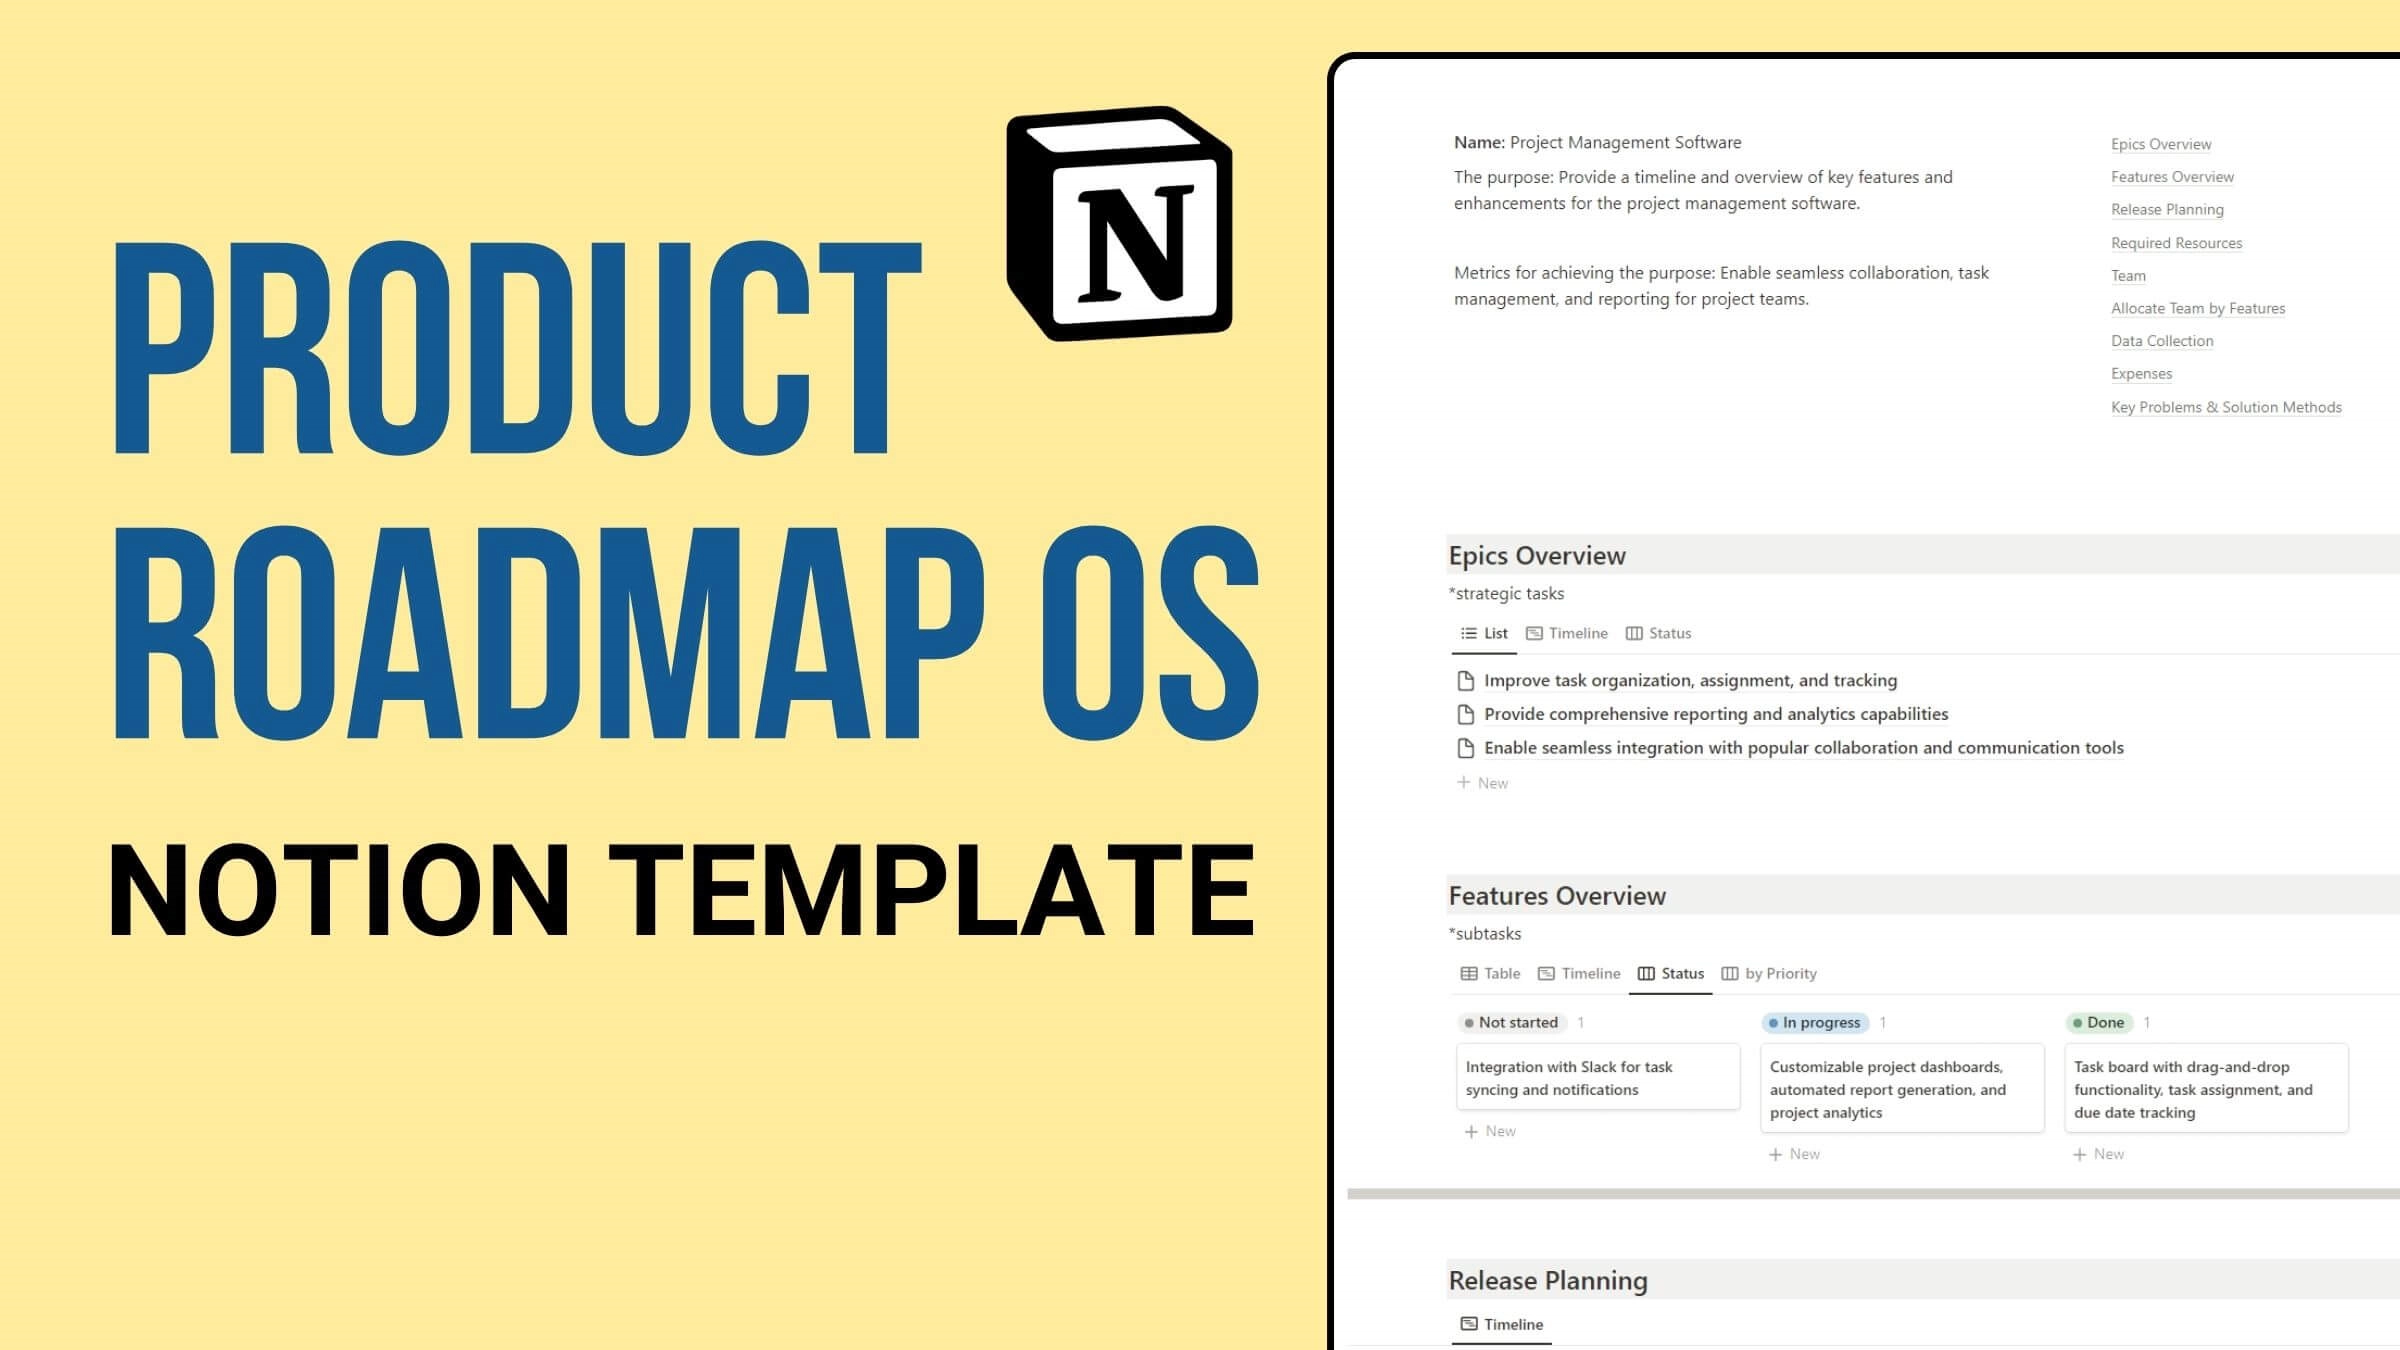 Notion The Best Product Roadmap OS